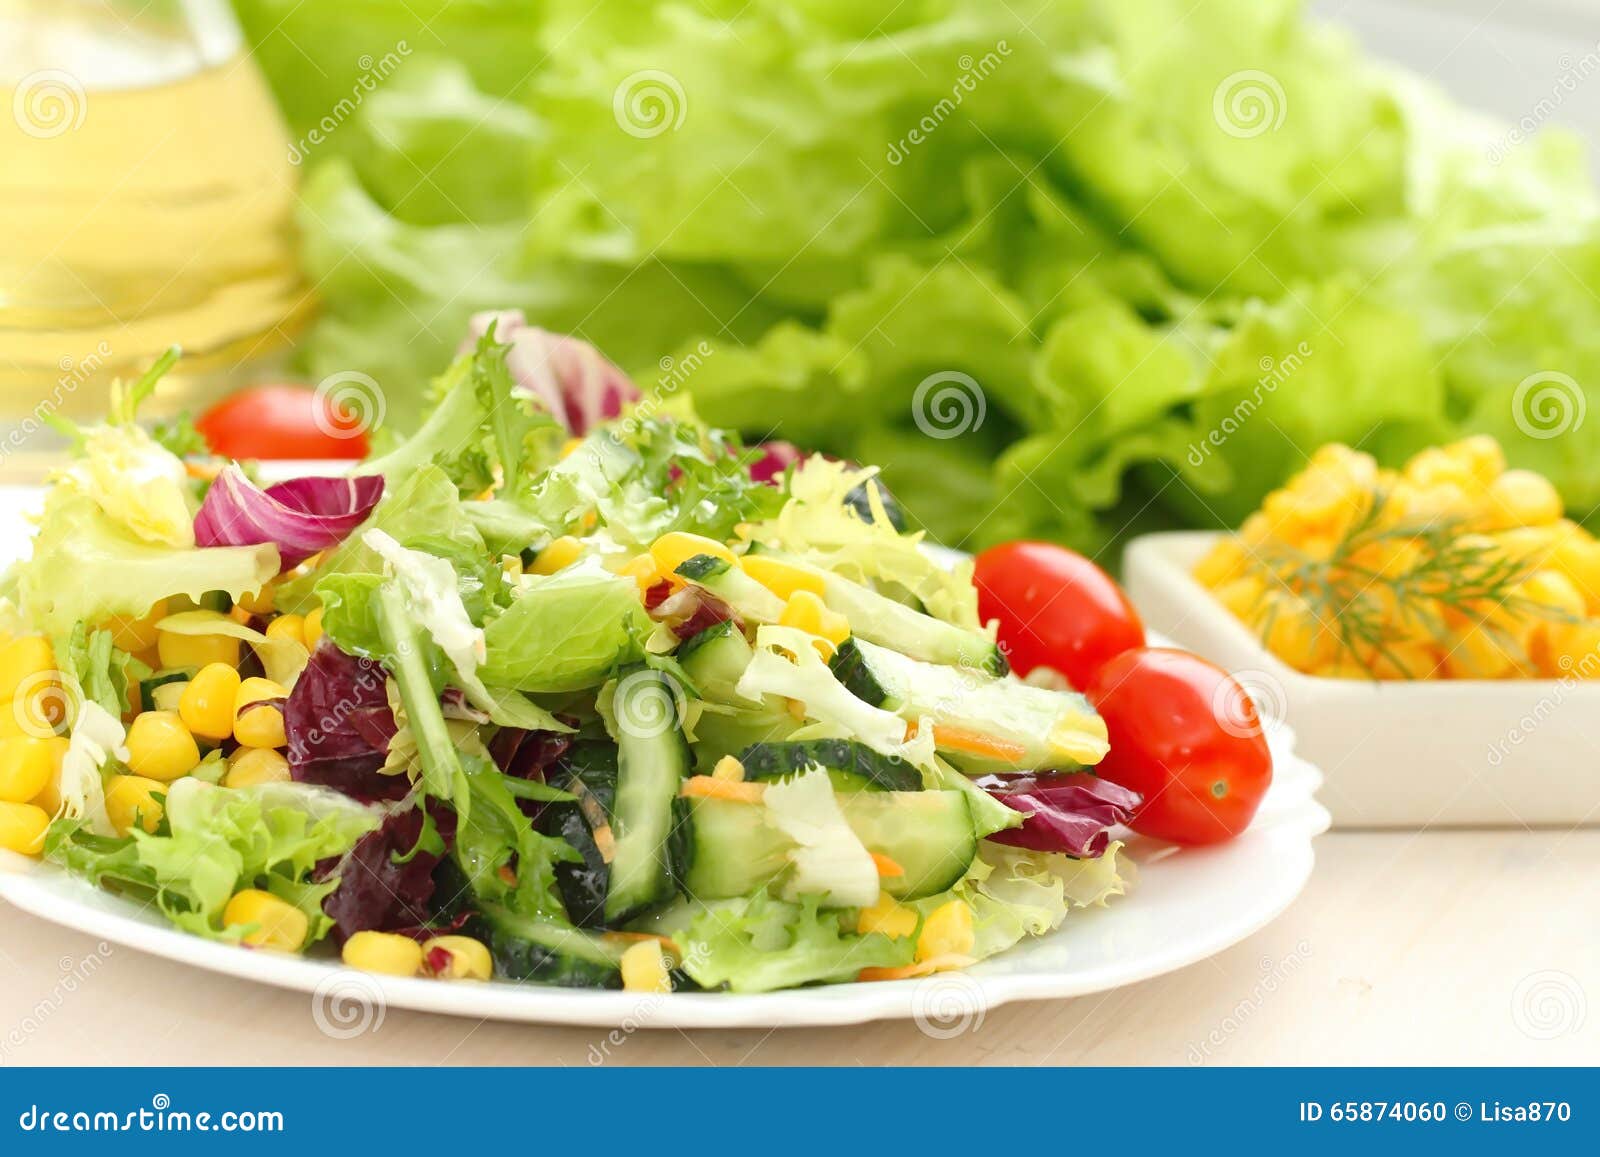 Salad Made of Fresh Vegetables with Oil Stock Photo - Image of green ...